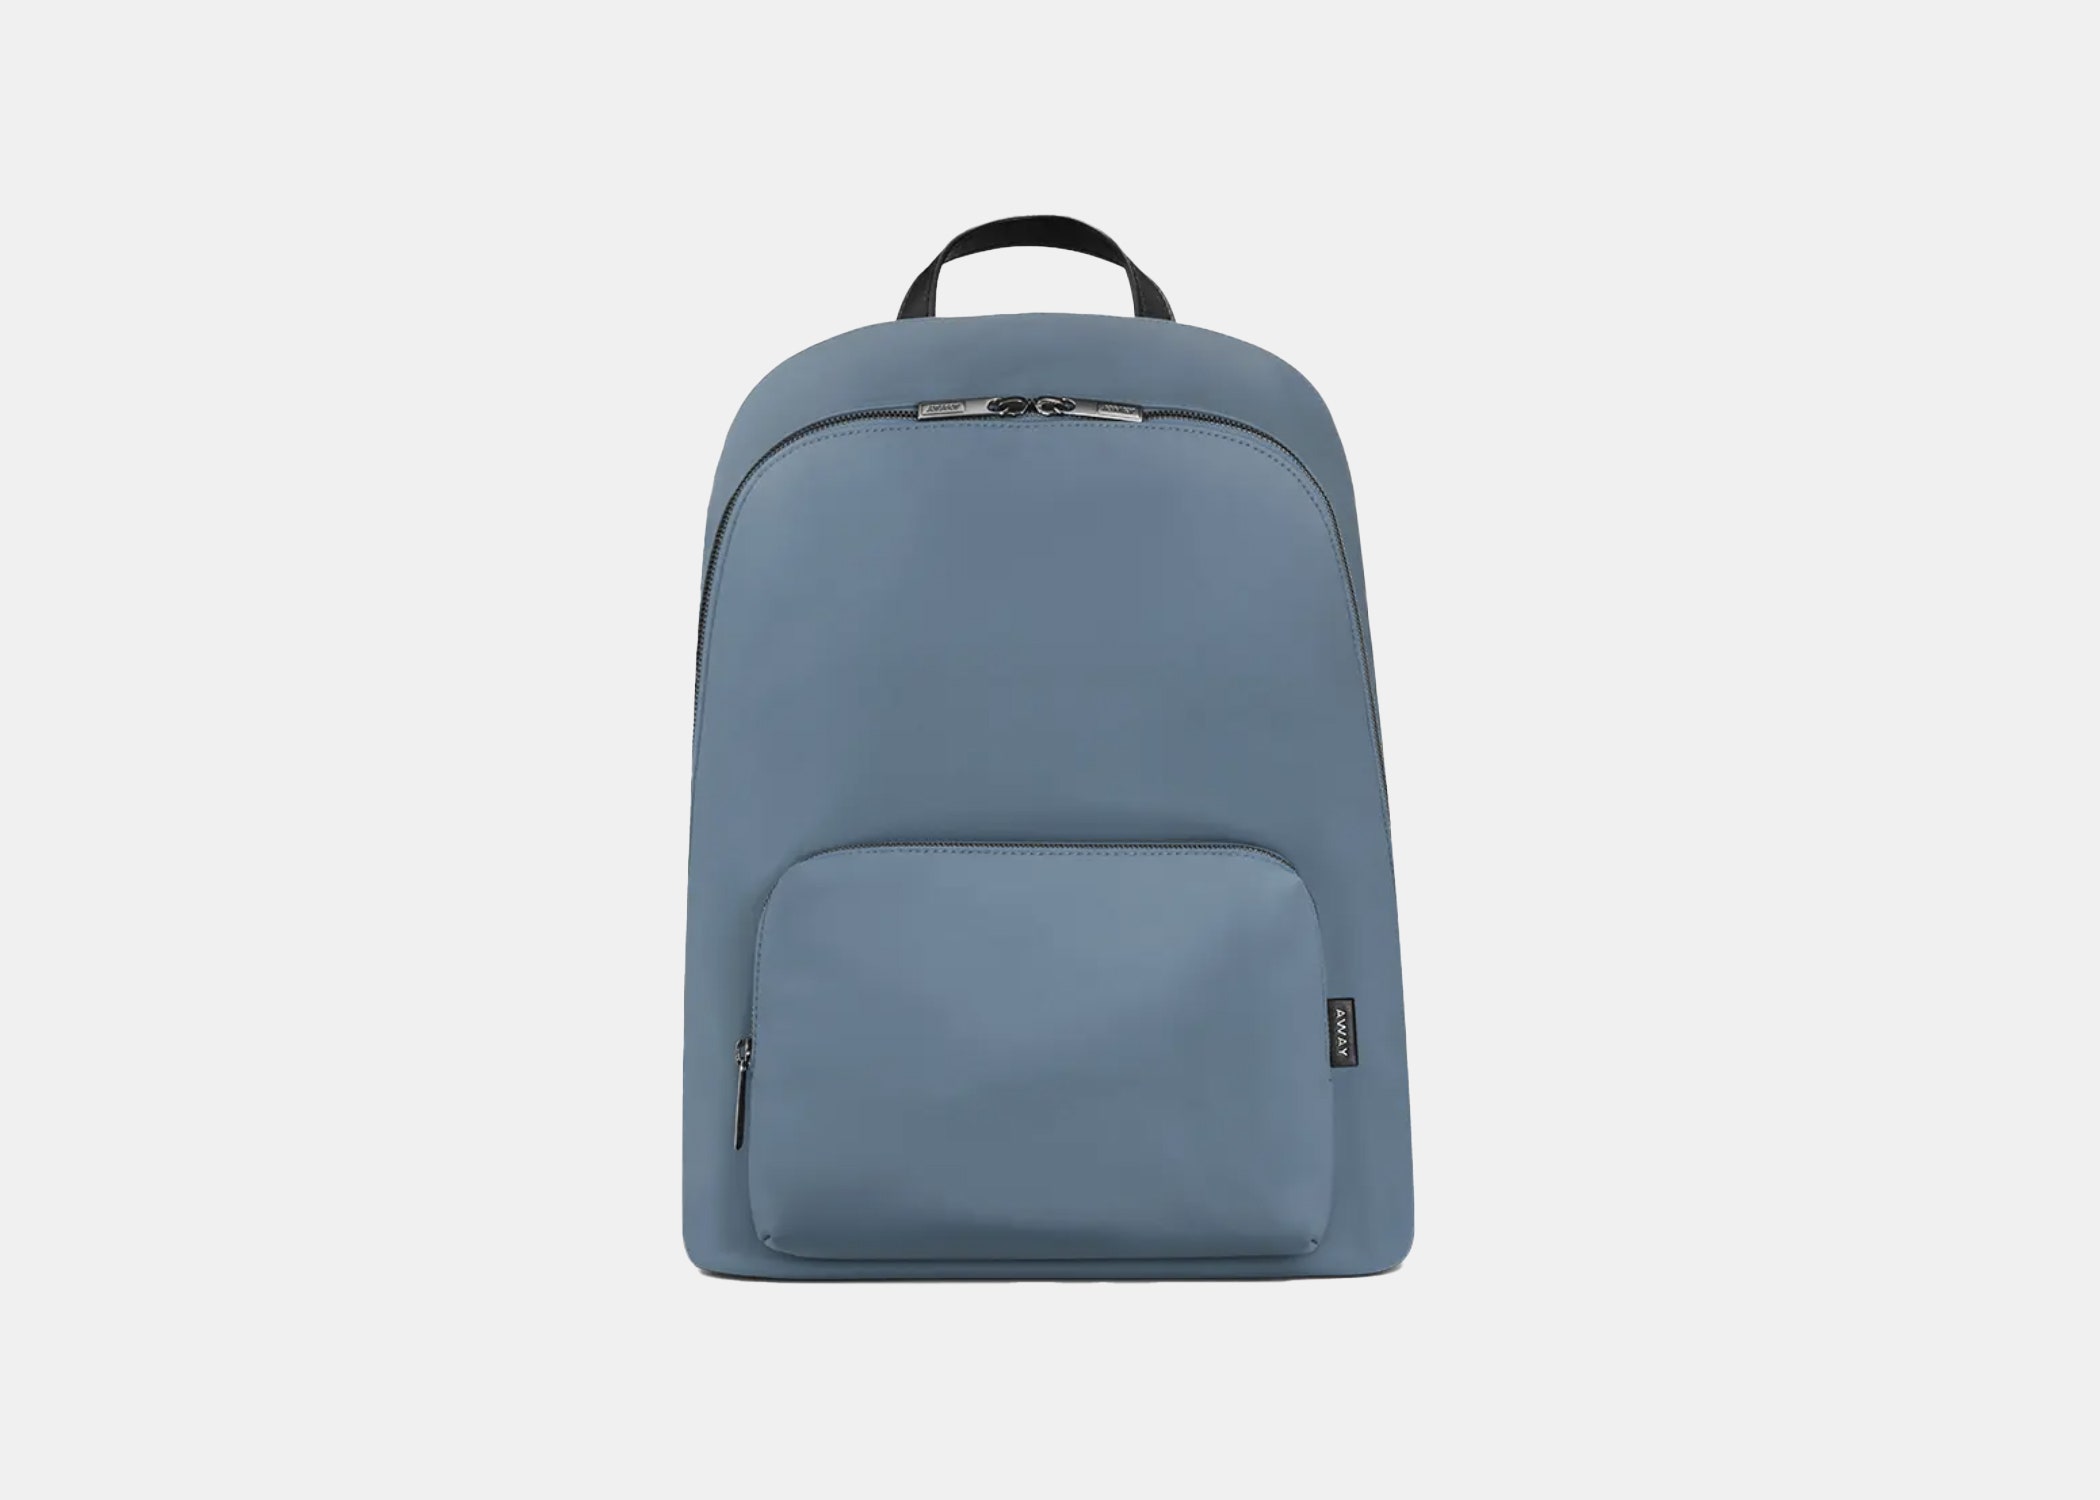 <p><strong>Best for business travel</strong></p> <p>For the trip where there is no time to be spared, a backpack from <a href="https://www.cntraveler.com/story/away-luggage-reviews?mbid=synd_msn_rss&utm_source=msn&utm_medium=syndication">Away</a> is the way and the light. Just like the brand’s much-loved suitcases, The Front Pocket backpack makes organization a cinch, thanks to the specificity of its design. A small, compact camera easily fits within the main compartment, and there's plenty of space for a laptop and photography gear—chargers, spare batteries, memory cards—and other loose, small travel items. The back of the pack has a space to stow your passport, and a key loop hangs from the bottom.</p> <p><strong>Noteworthy features:</strong> 15-inch laptop sleeve, trolley sleeve that secures to luggage</p> $195, Away. <a href="http://awaytravel.com/travel-bags/front-pocket-backpack?color=coast_nylon">Get it now!</a><p>Sign up to receive the latest news, expert tips, and inspiration on all things travel</p><a href="https://www.cntraveler.com/newsletter/the-daily?sourceCode=msnsend">Inspire Me</a>